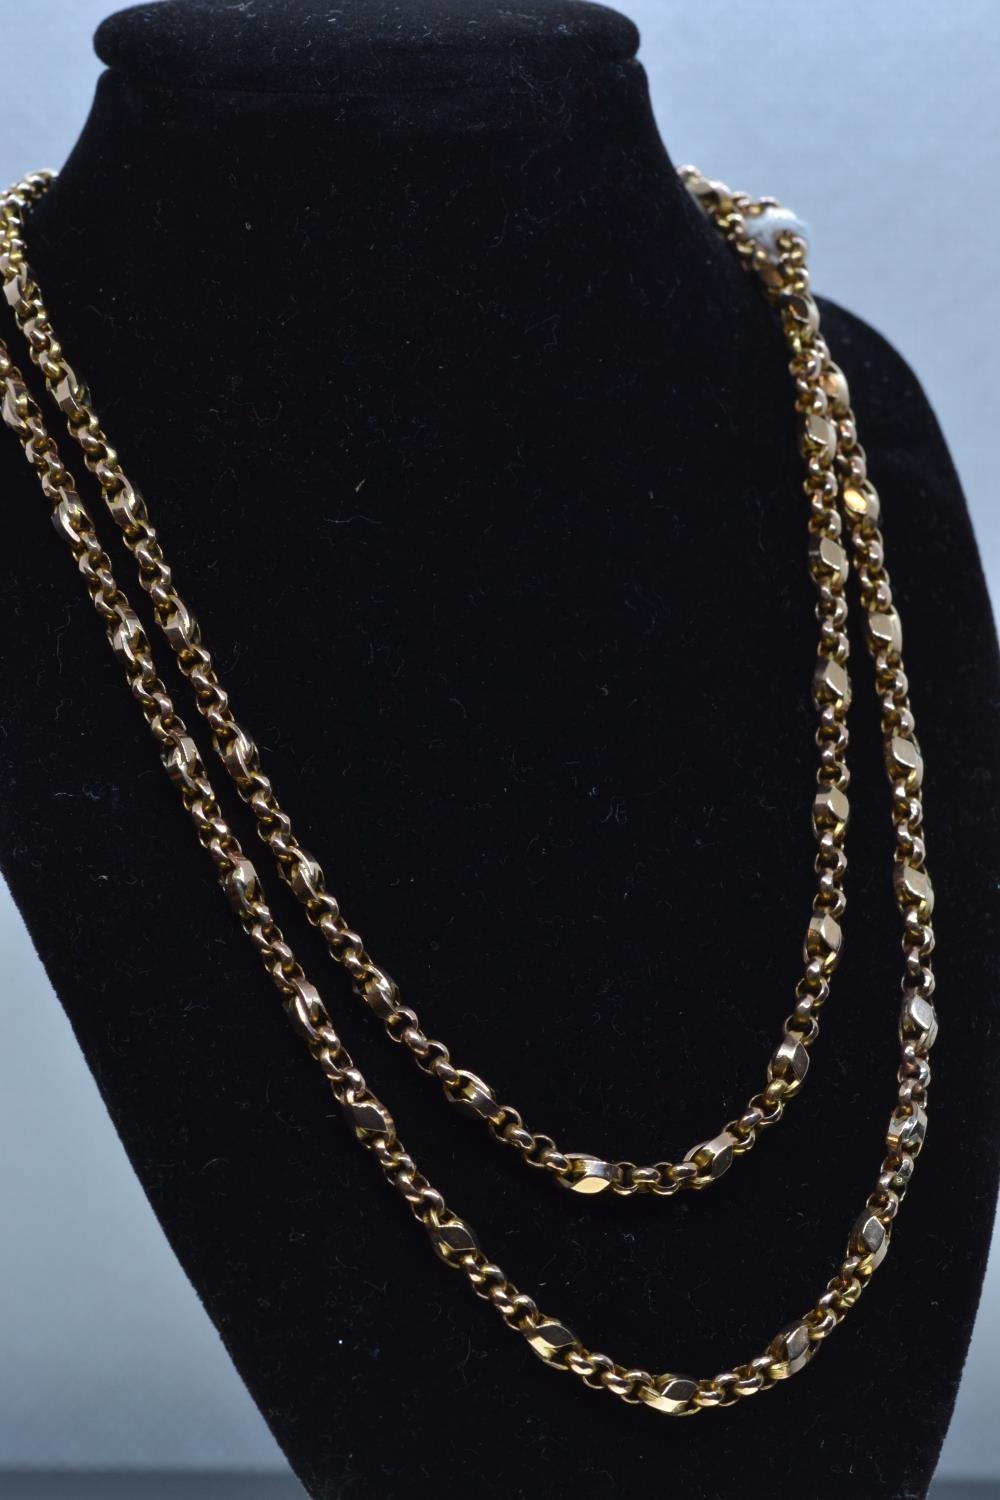 Yellow metal neck chain, tests positive for 9ct gold, circumference 640mm, 11.6 grams  - Image 2 of 3